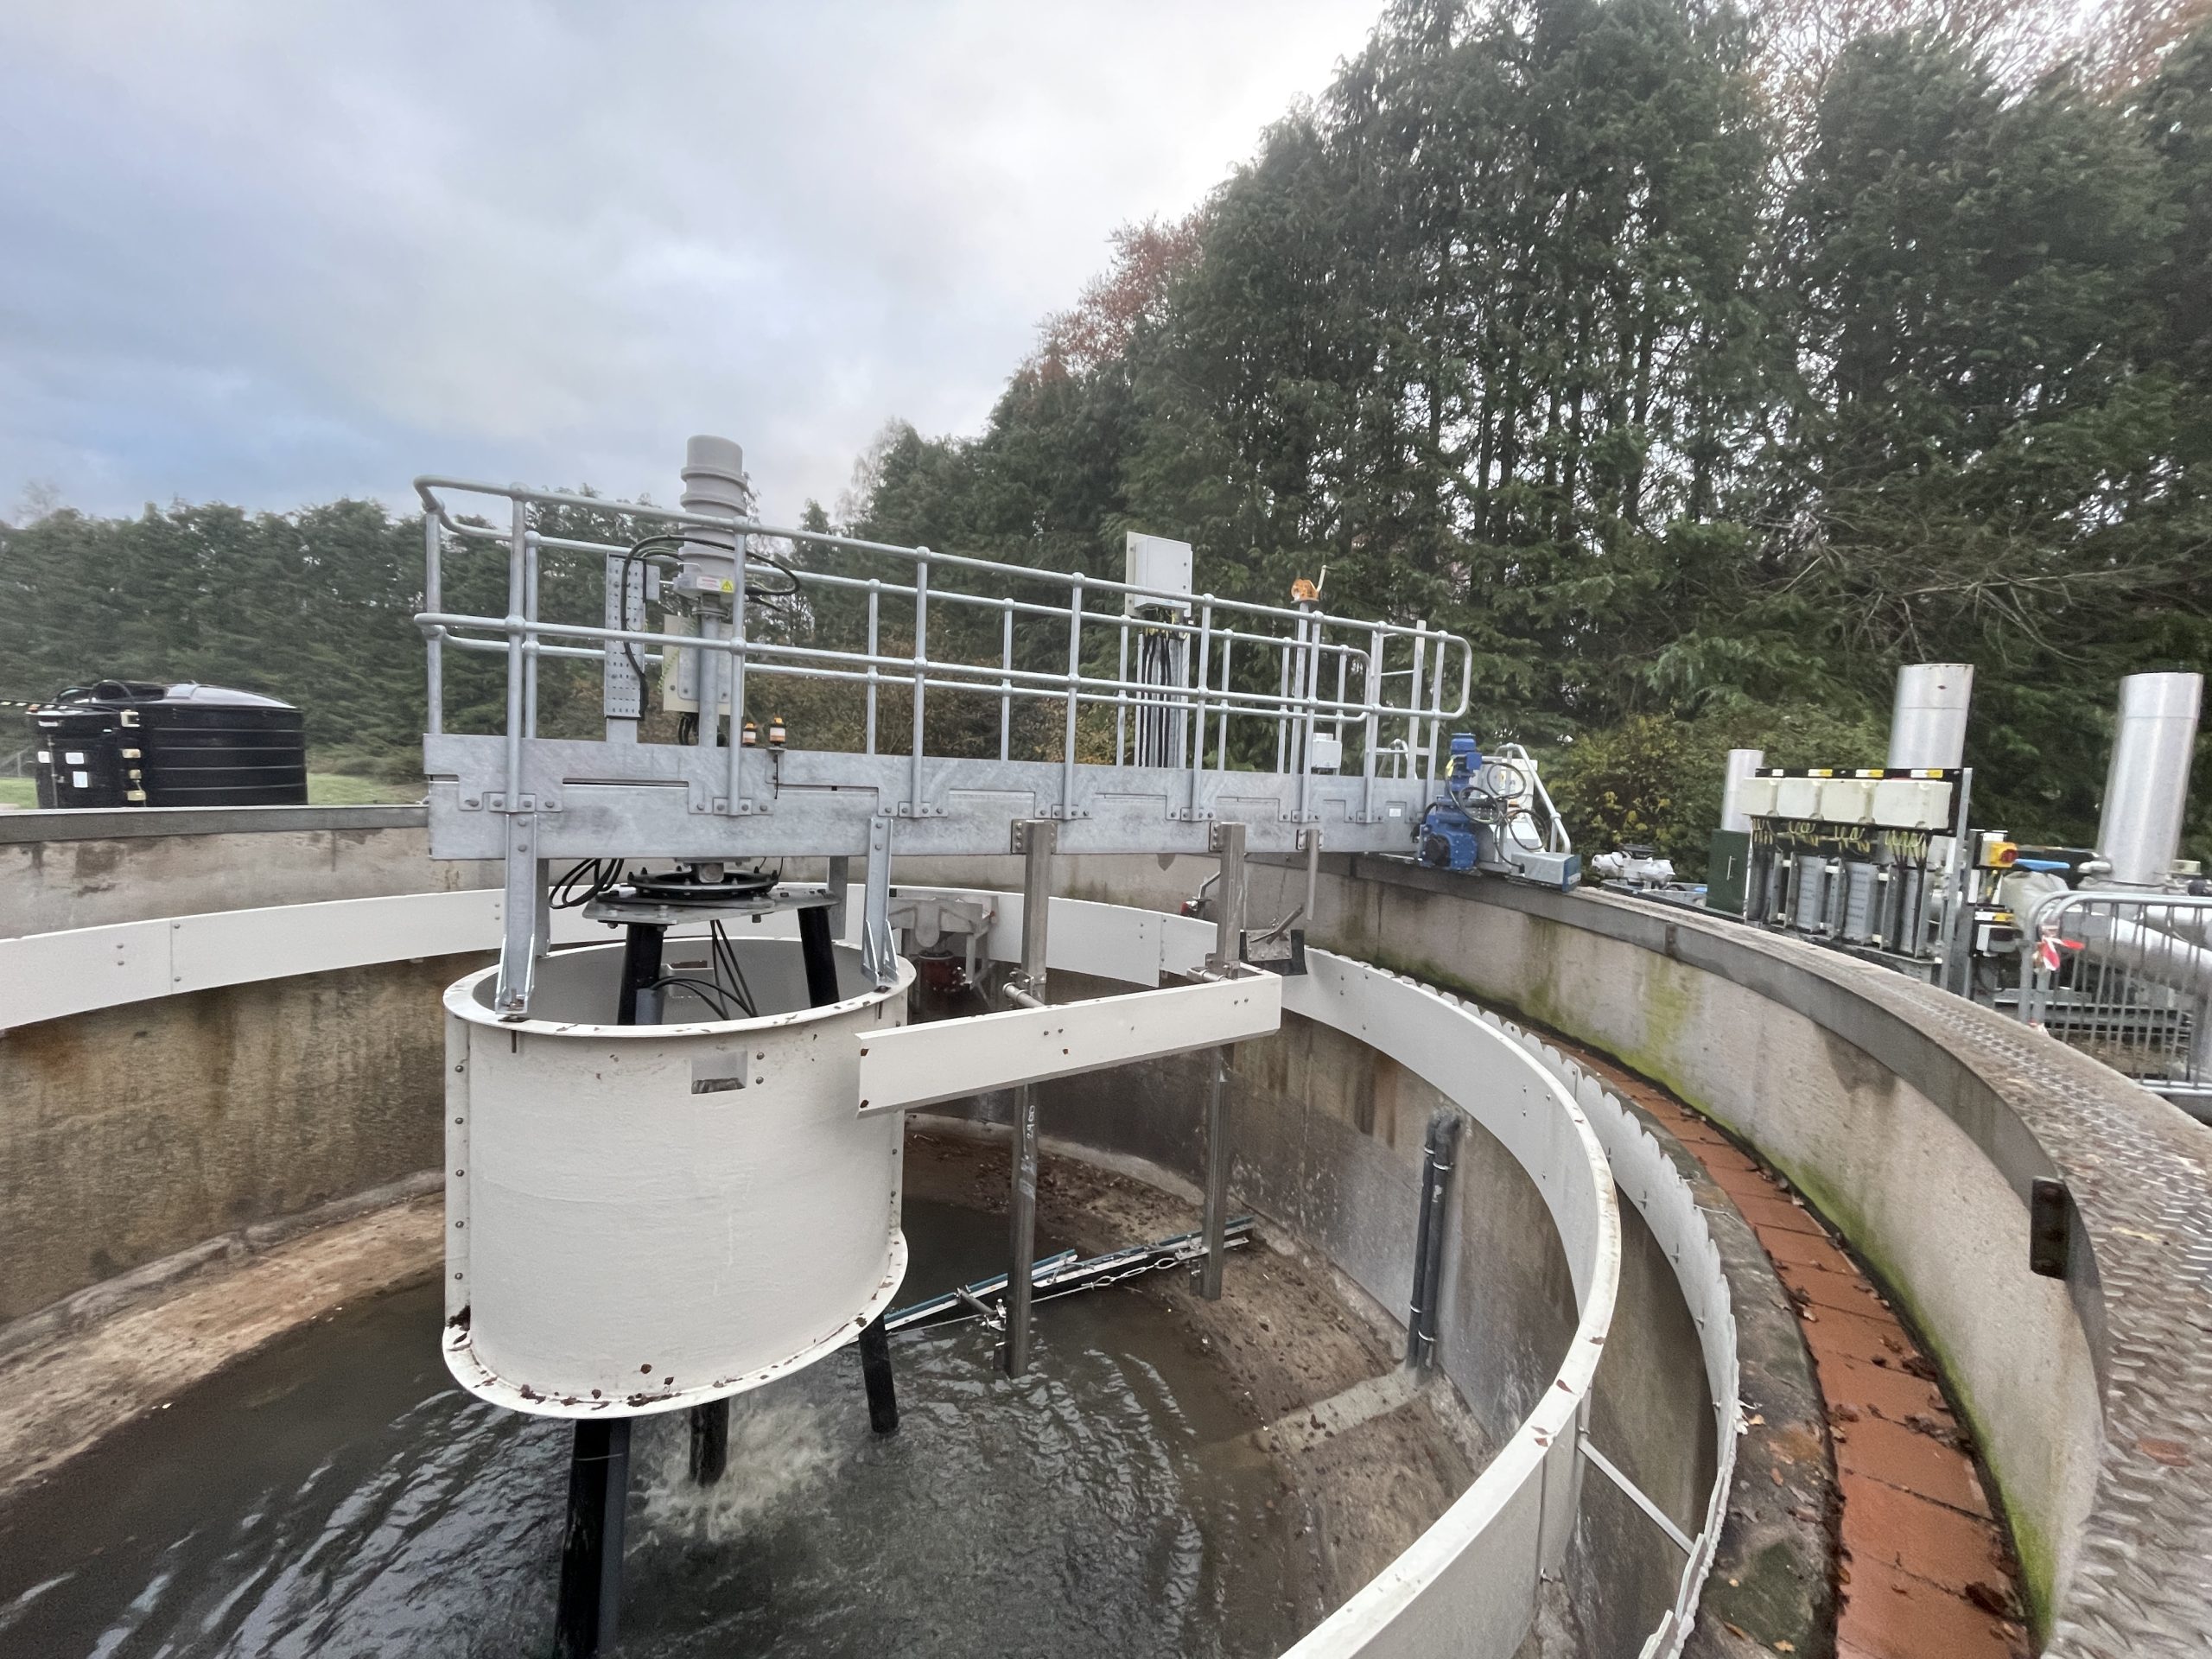 Gallery Image for Alford Wastewater Treatment Works